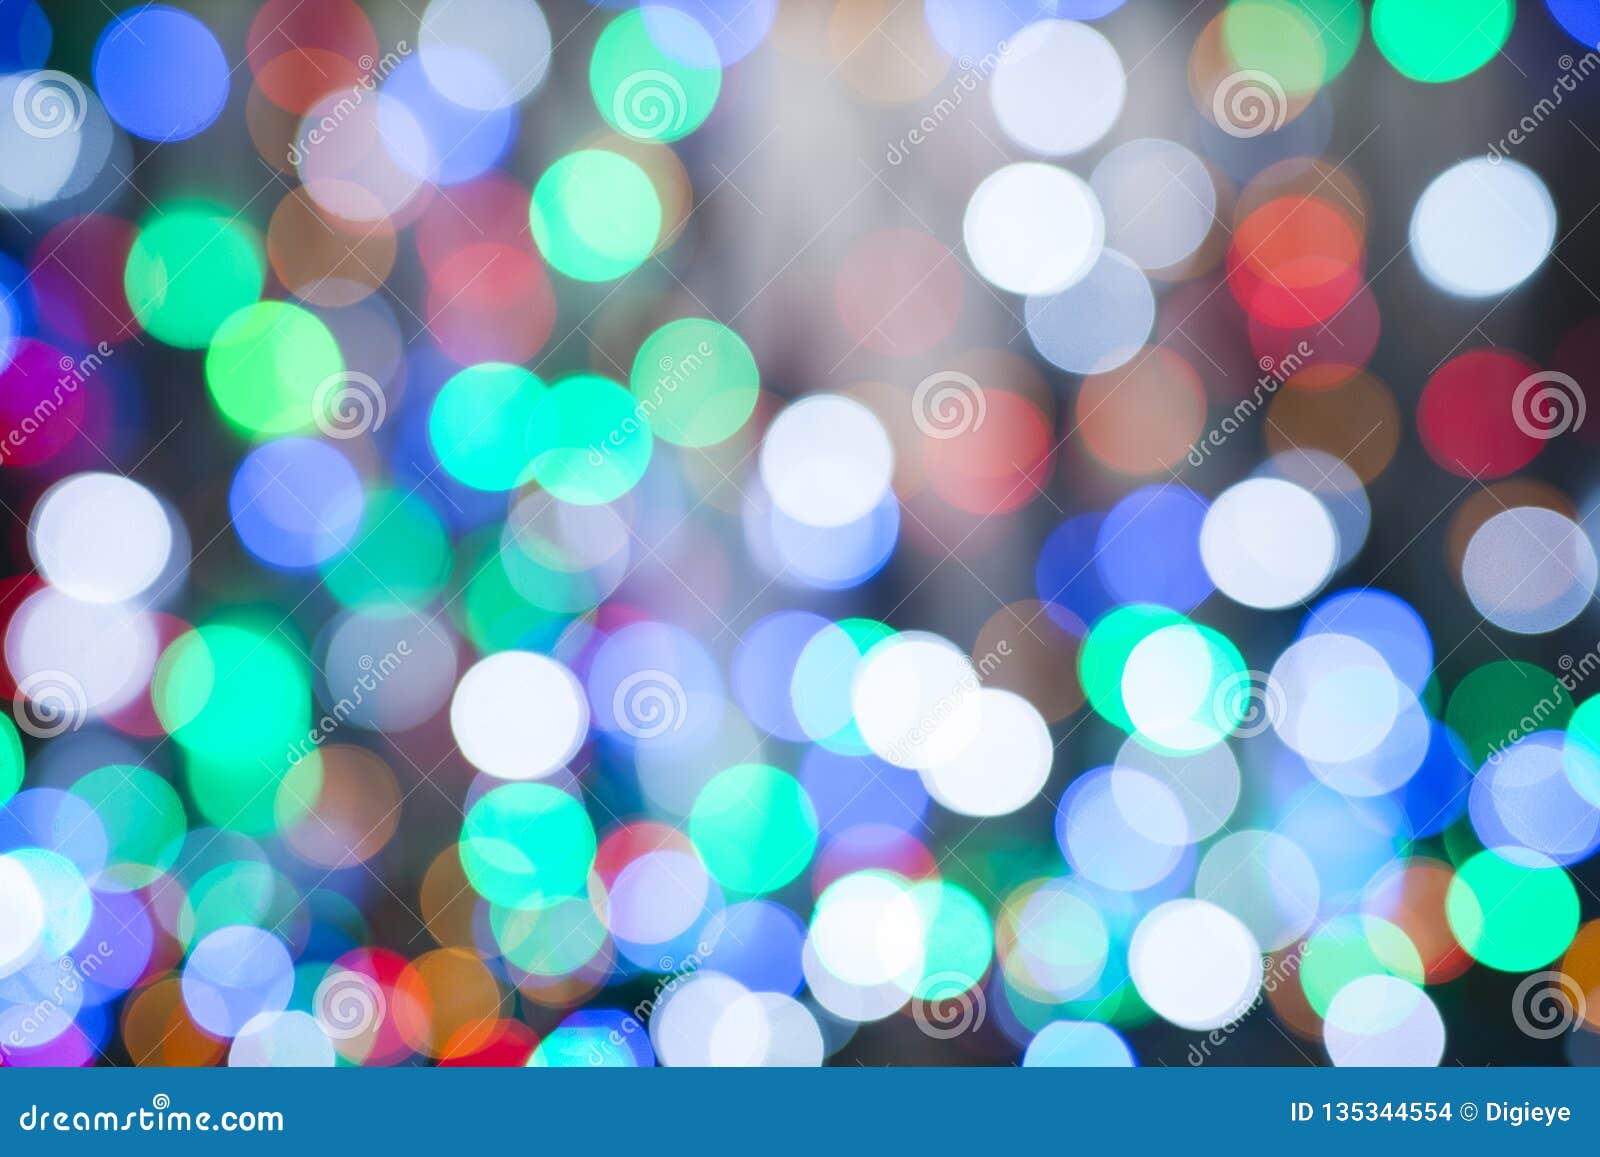 Bokeh Effect Blurry Lighting Abstract Background Stock Photo - Image of ...